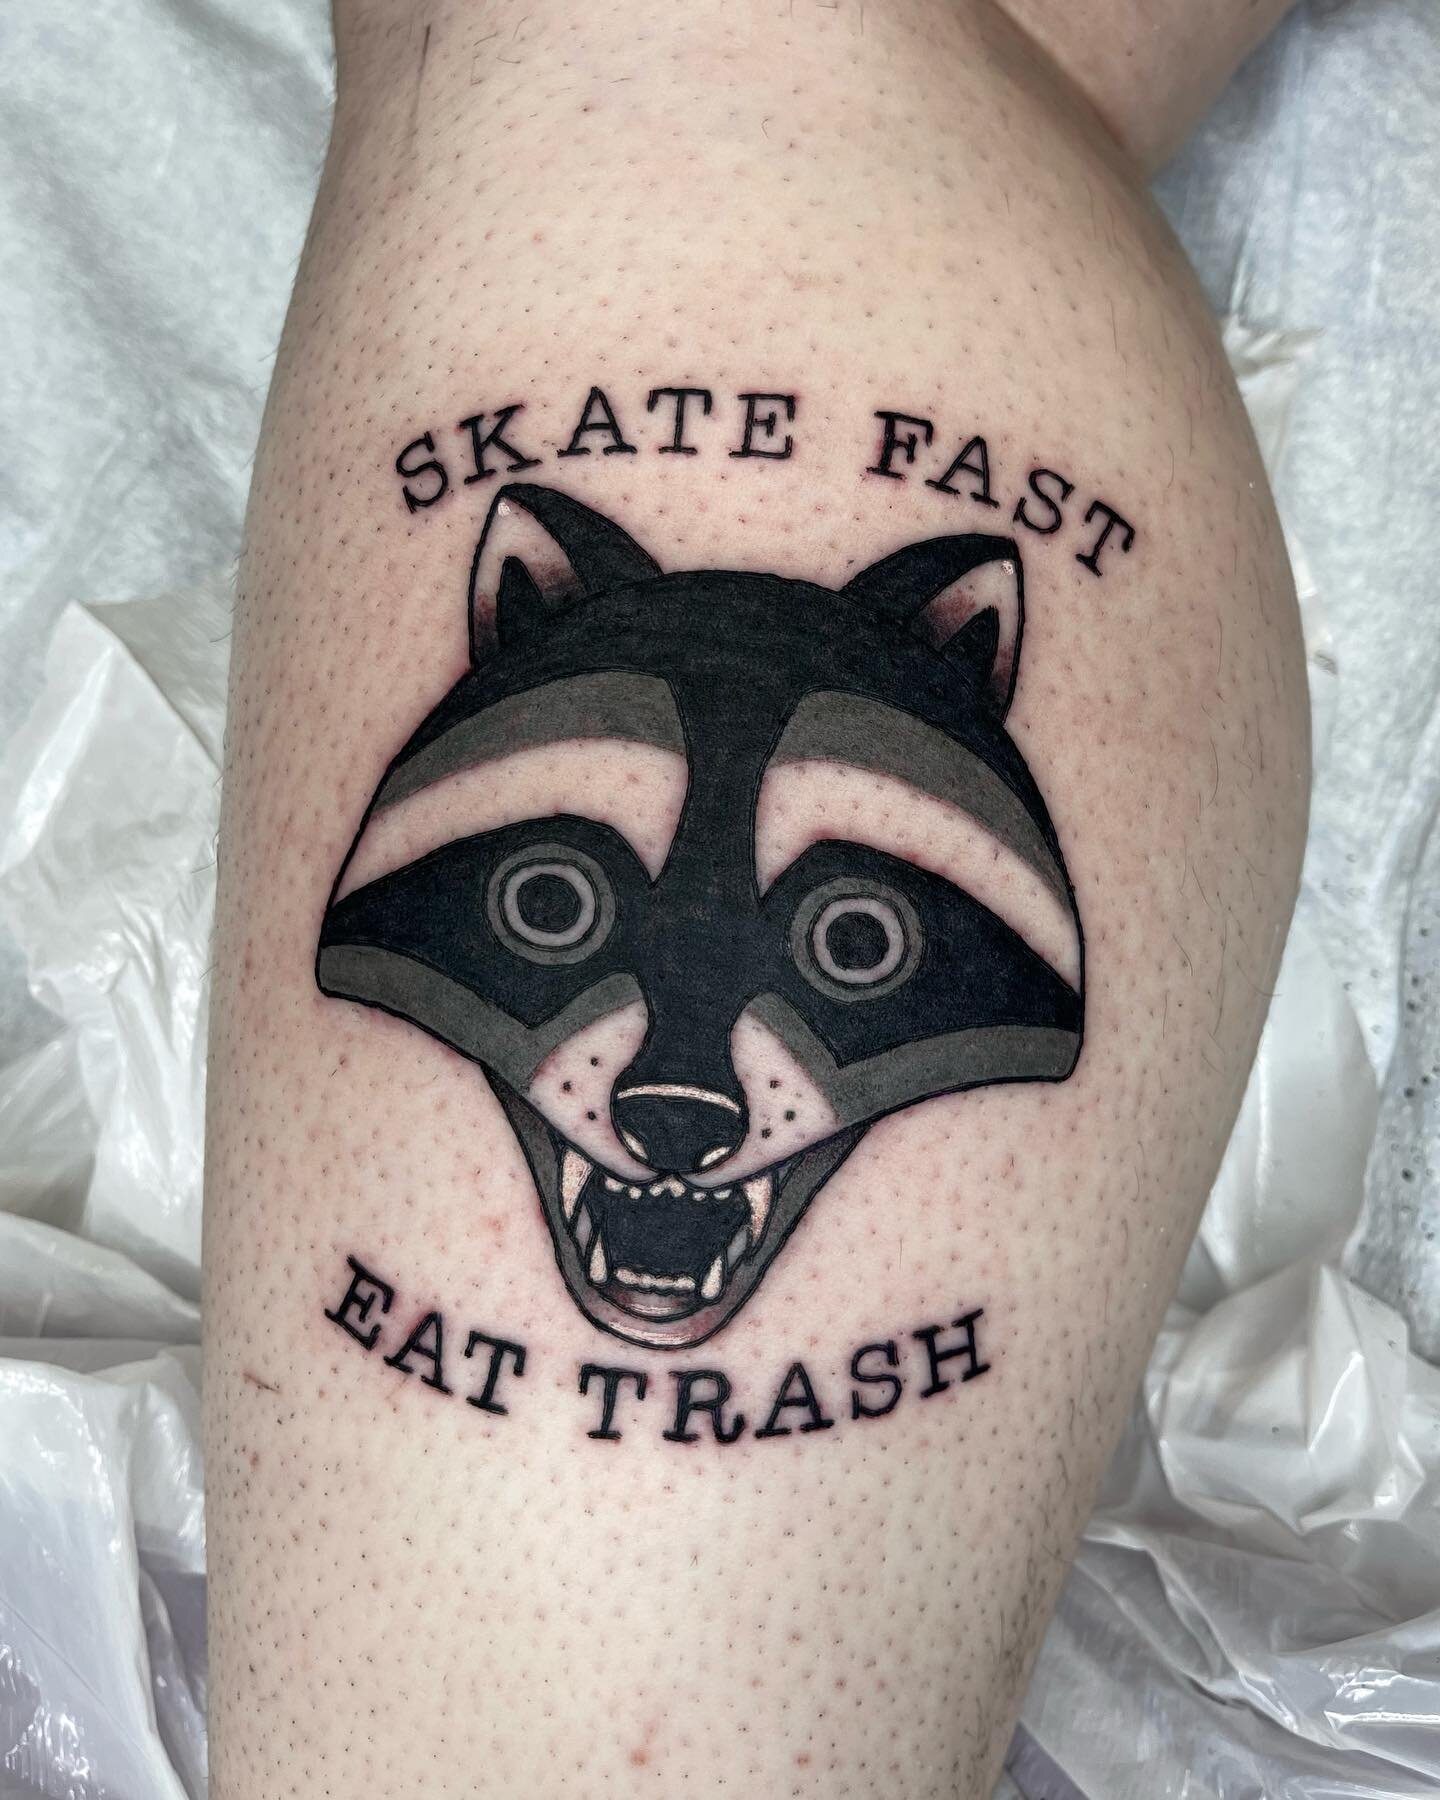 Skate Fast, Eat Trash! Tattoo by @emilycolgantattoos. Give her a follow and DM her to book an appointment. 

#raccoon #skate #raccoontattoo #skateordie #blackandgreytattoo #junipermoontattoo #femaletattooartist #naturetattoo #tattoo #tattoos #tattooi